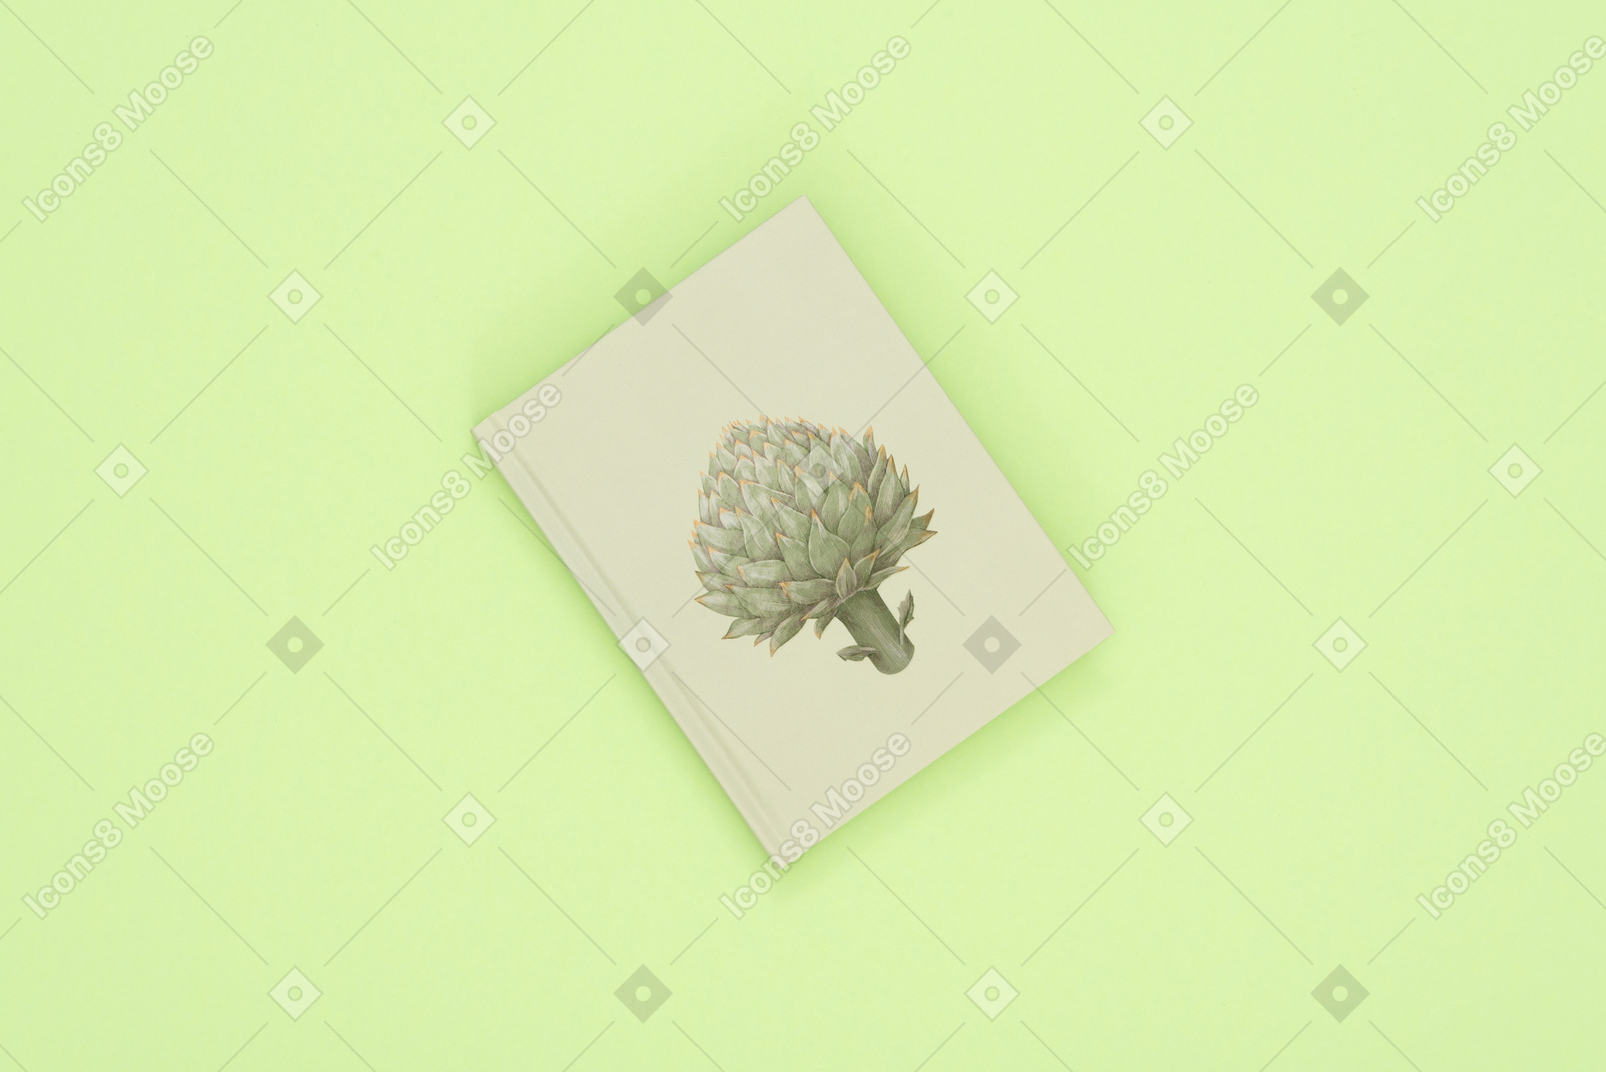 Eco green notebook